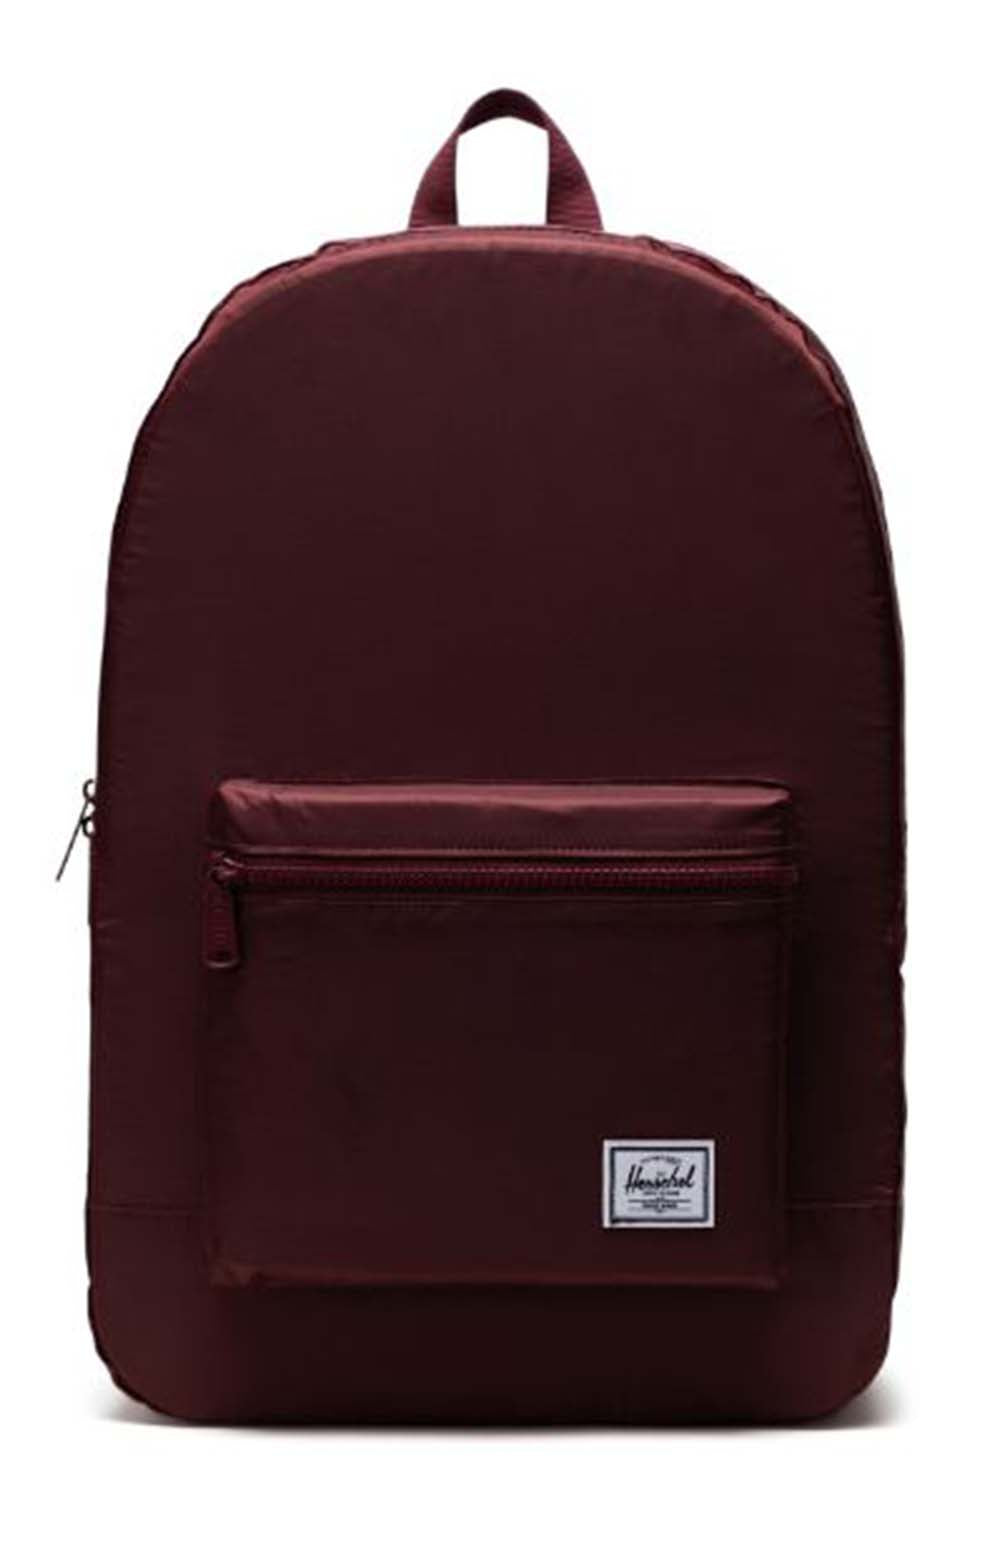 Packable Daypack - Port